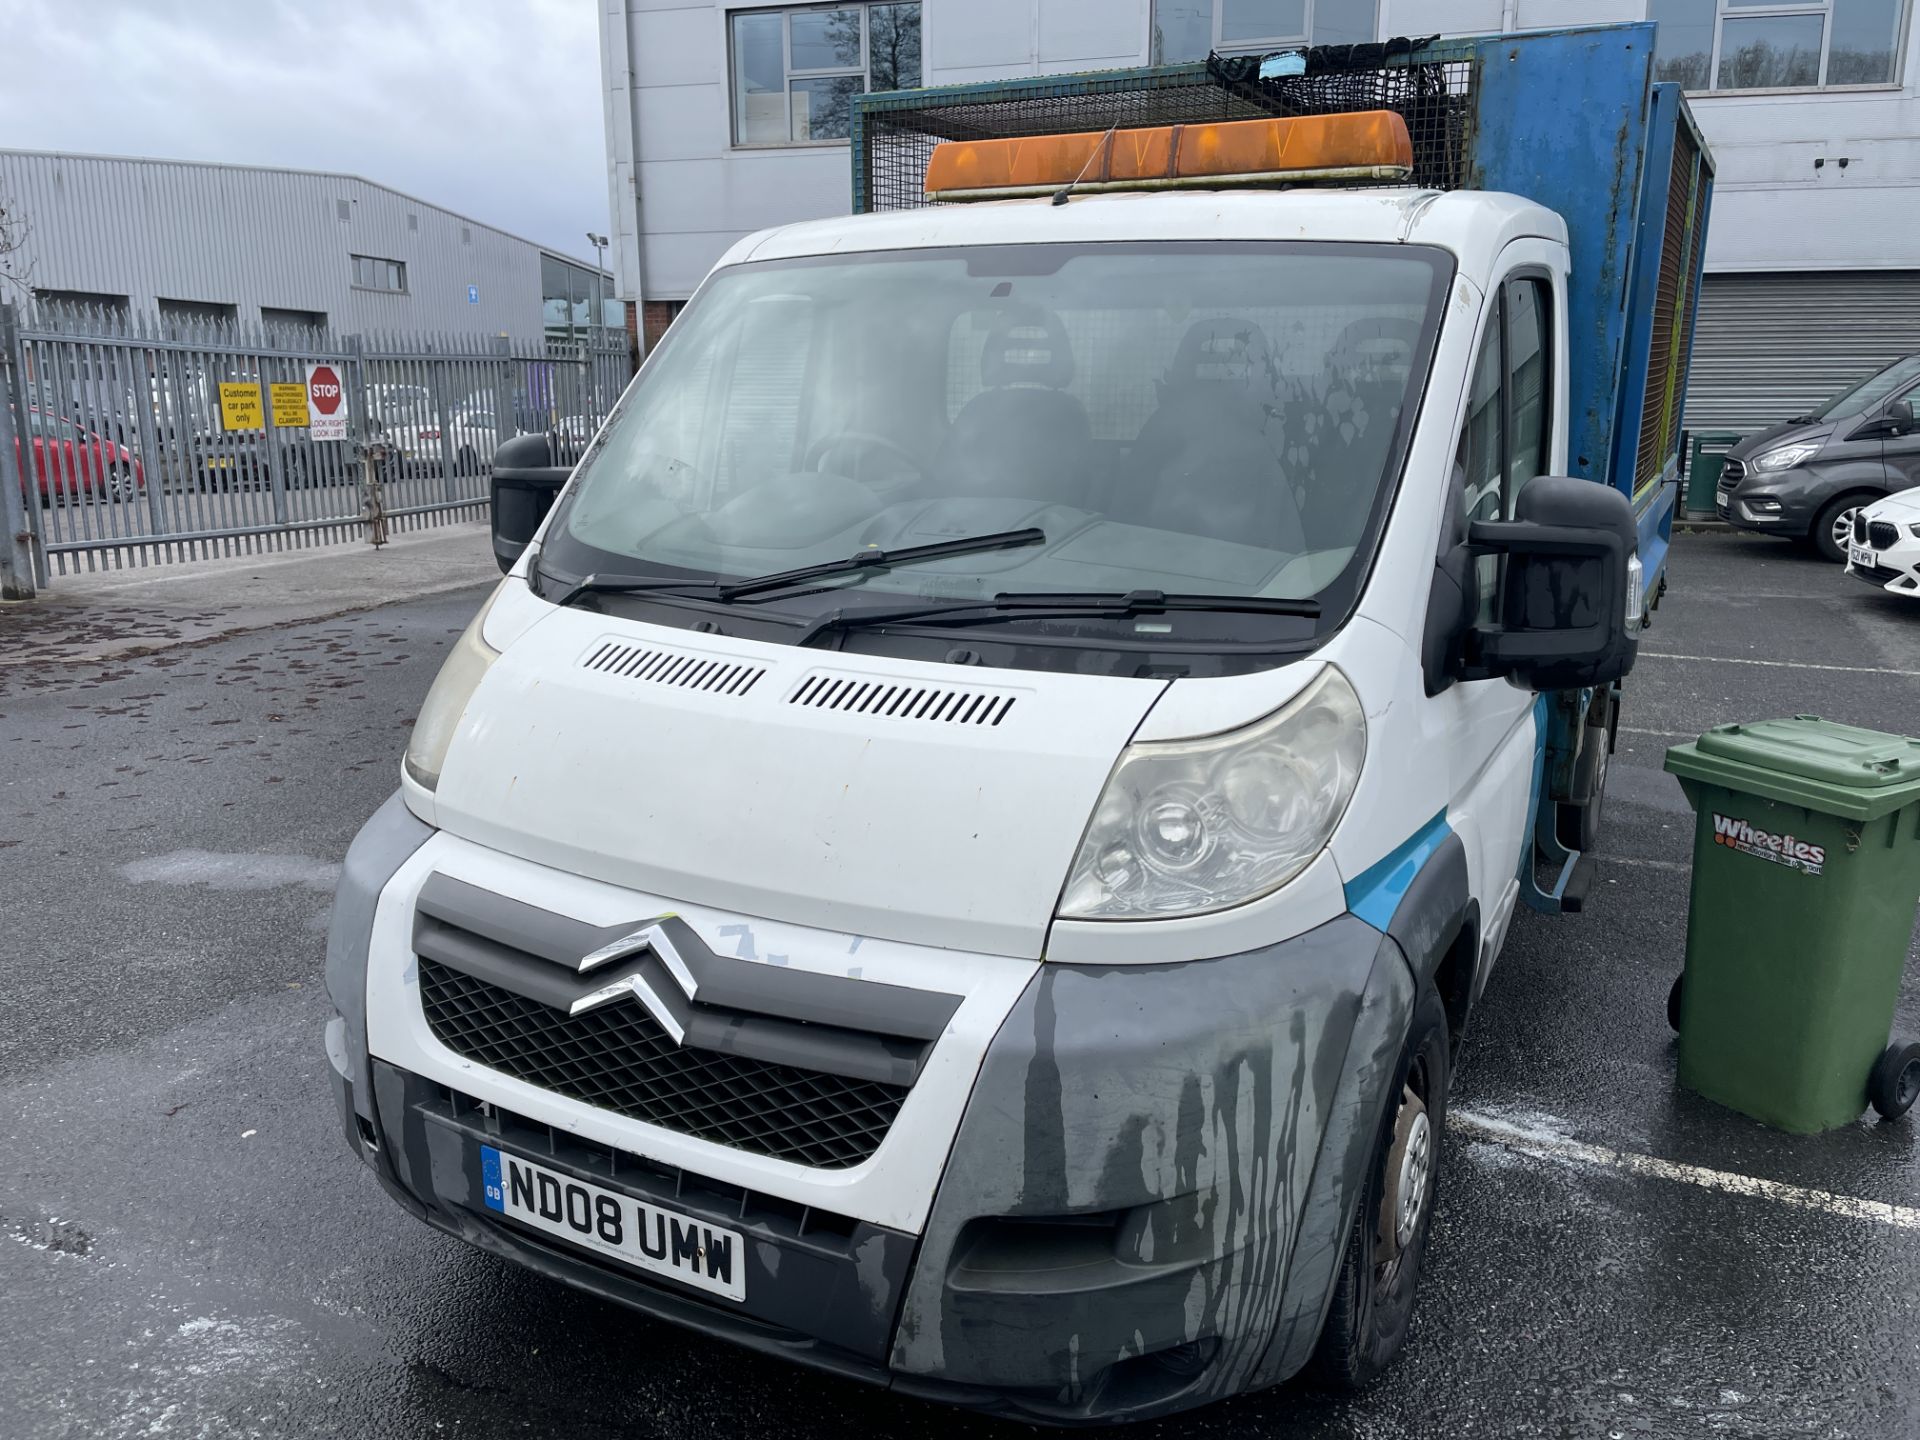 Citroen Relay Caged Tipper with rare Wheelie Bin Lift (39568) - Image 17 of 19